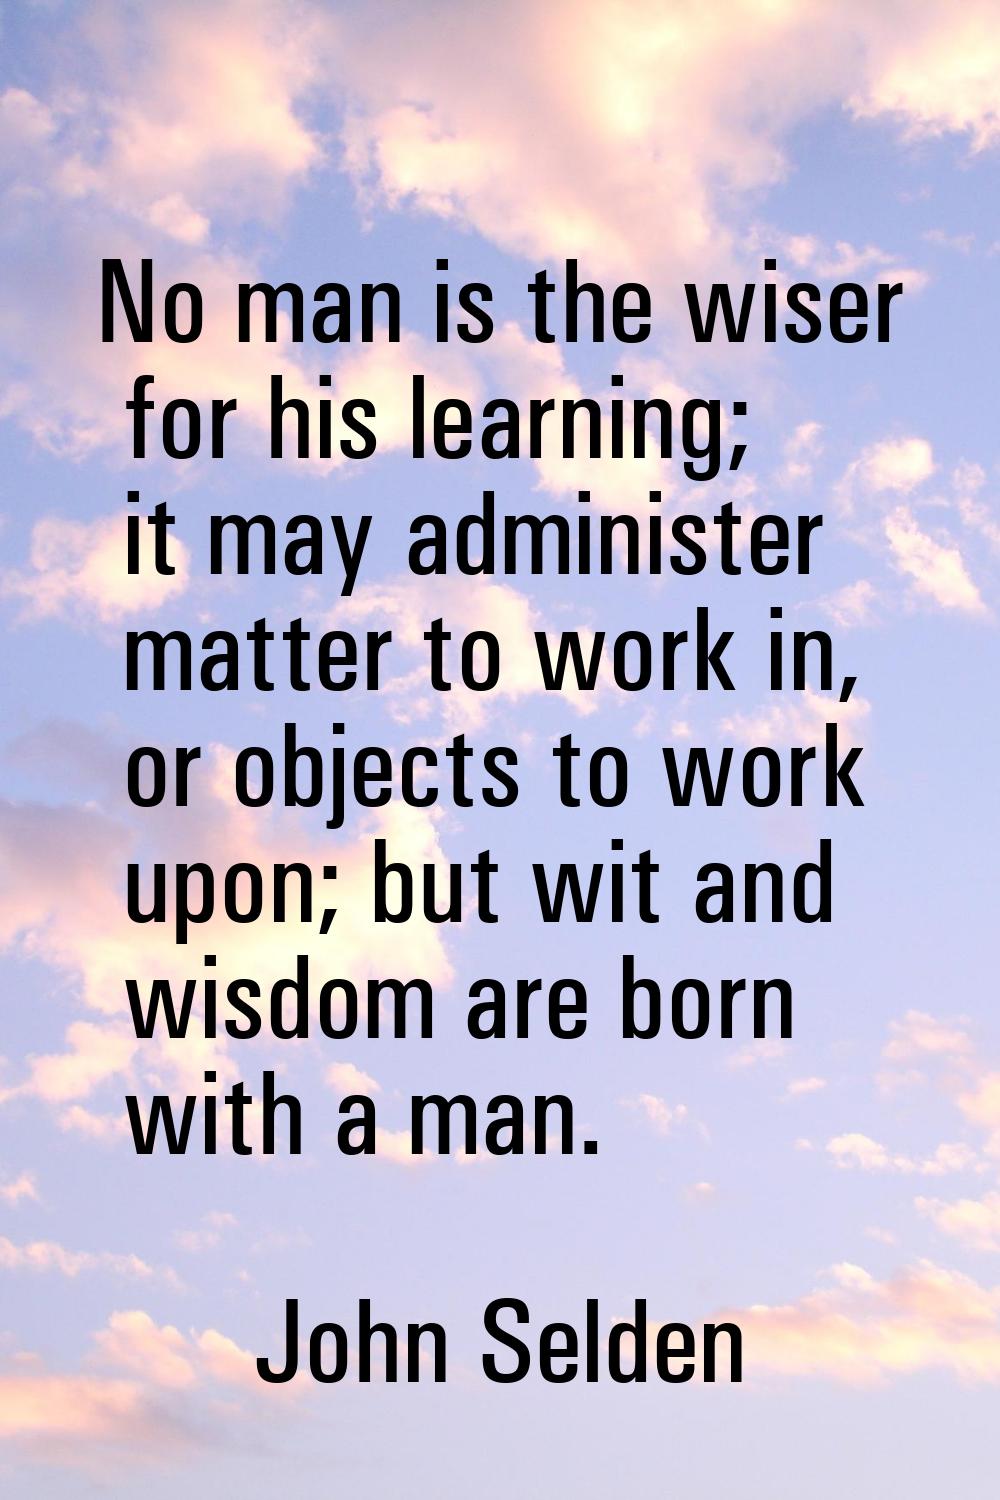 No man is the wiser for his learning; it may administer matter to work in, or objects to work upon;